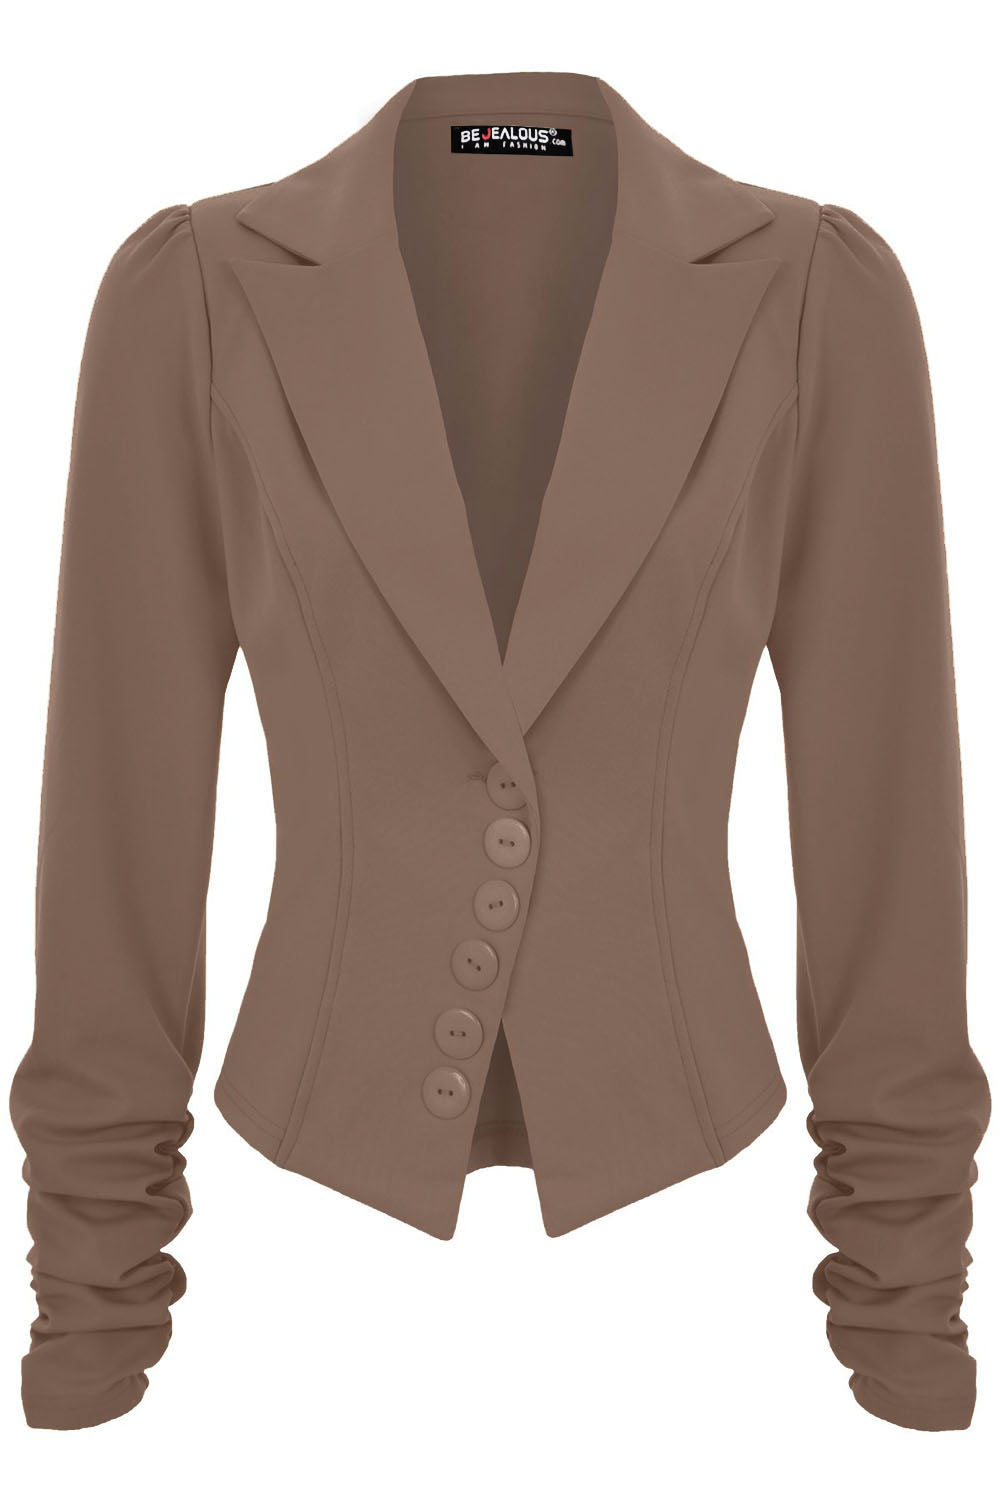 Lily 6 Buttons Ruched Long Sleeve Jacket Blazer